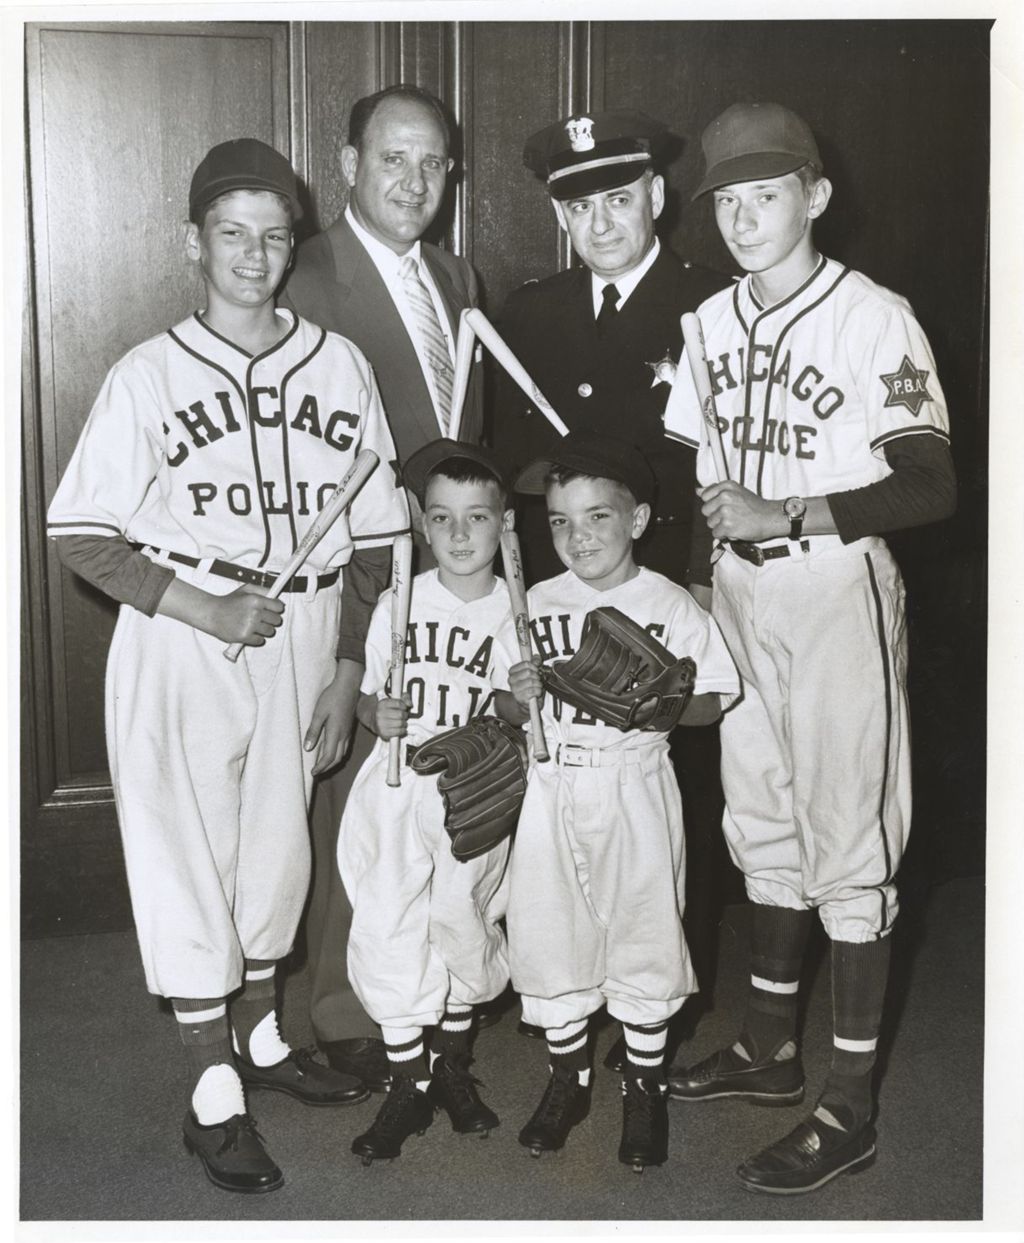 William and John Daley and others in Chicago Police baseball uniforms